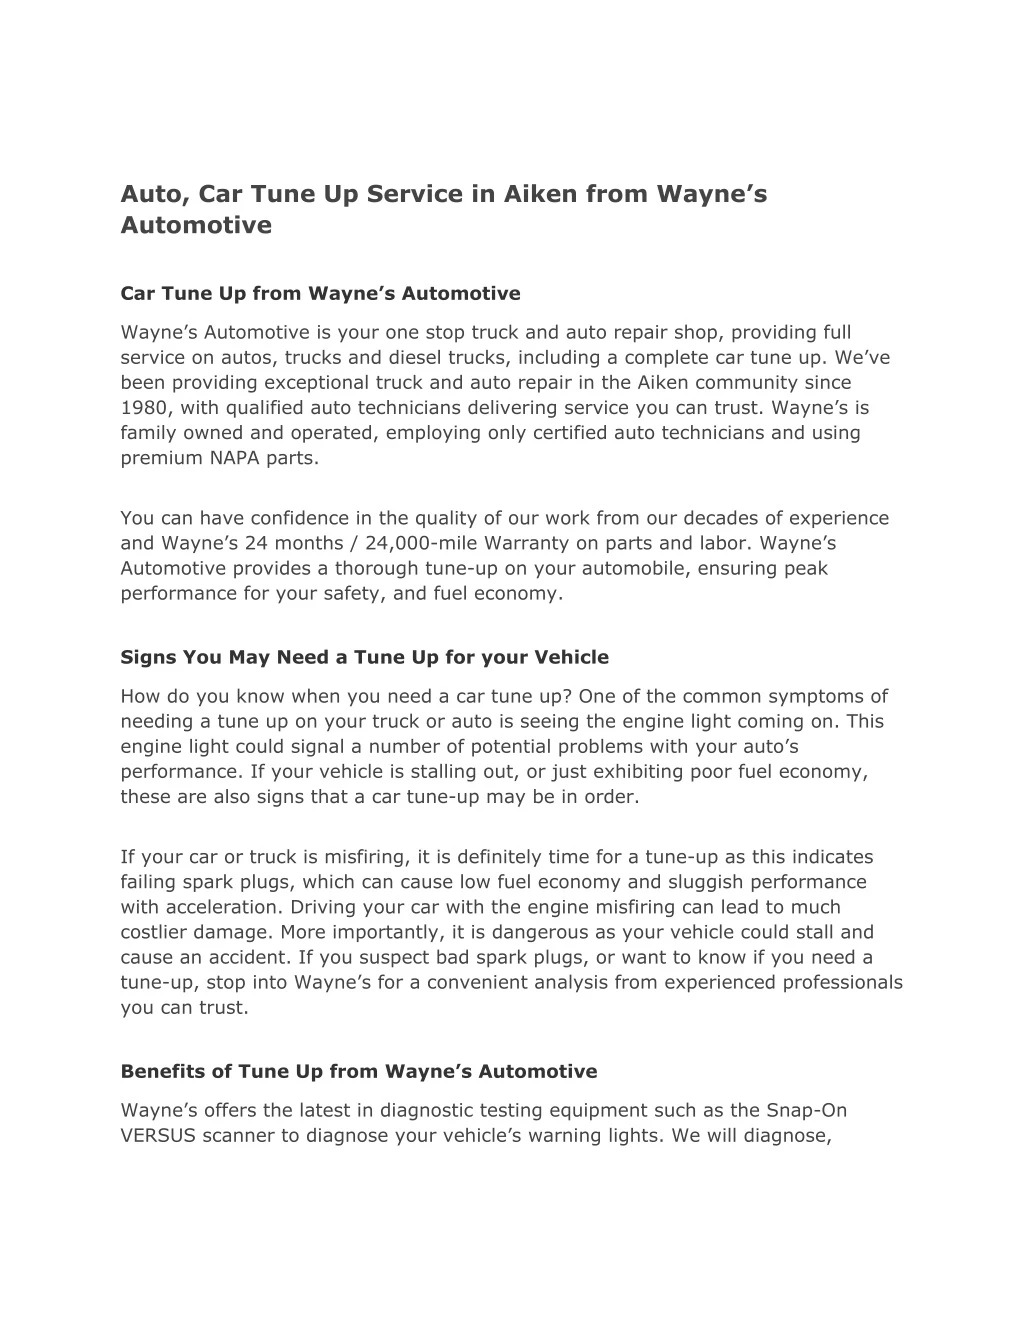 auto car tune up service in aiken from wayne